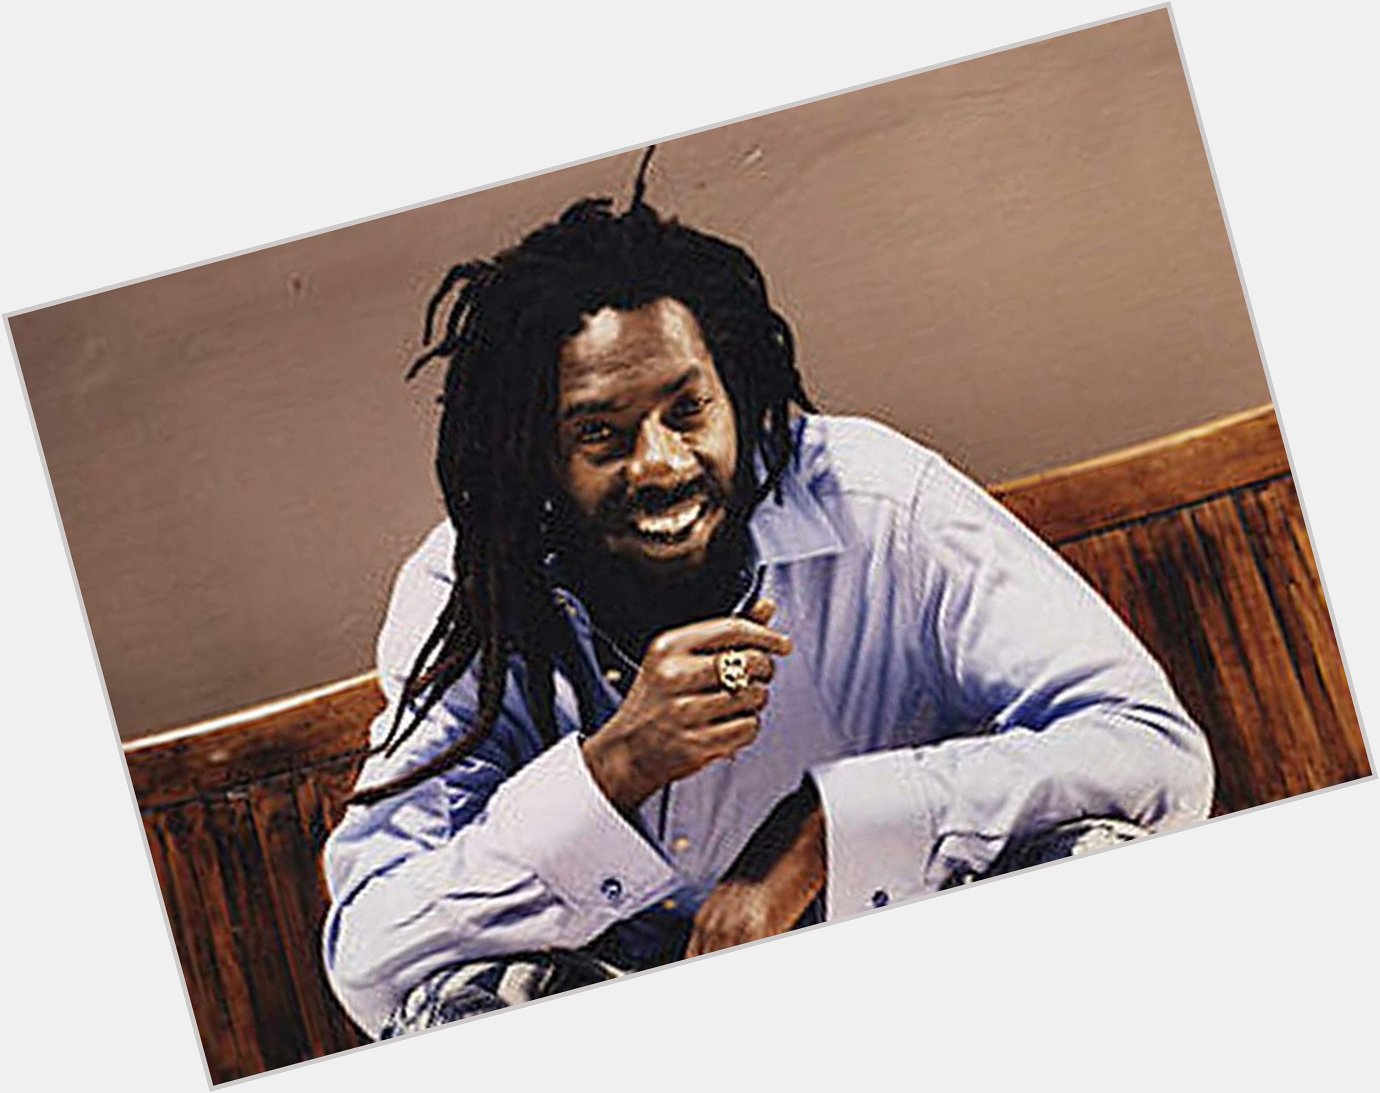 A HAPPY BIRTHDAY TO LEADING JAMAICAN REGGAE ARTISTE BUJU BANTON.  Do have a great day!!  